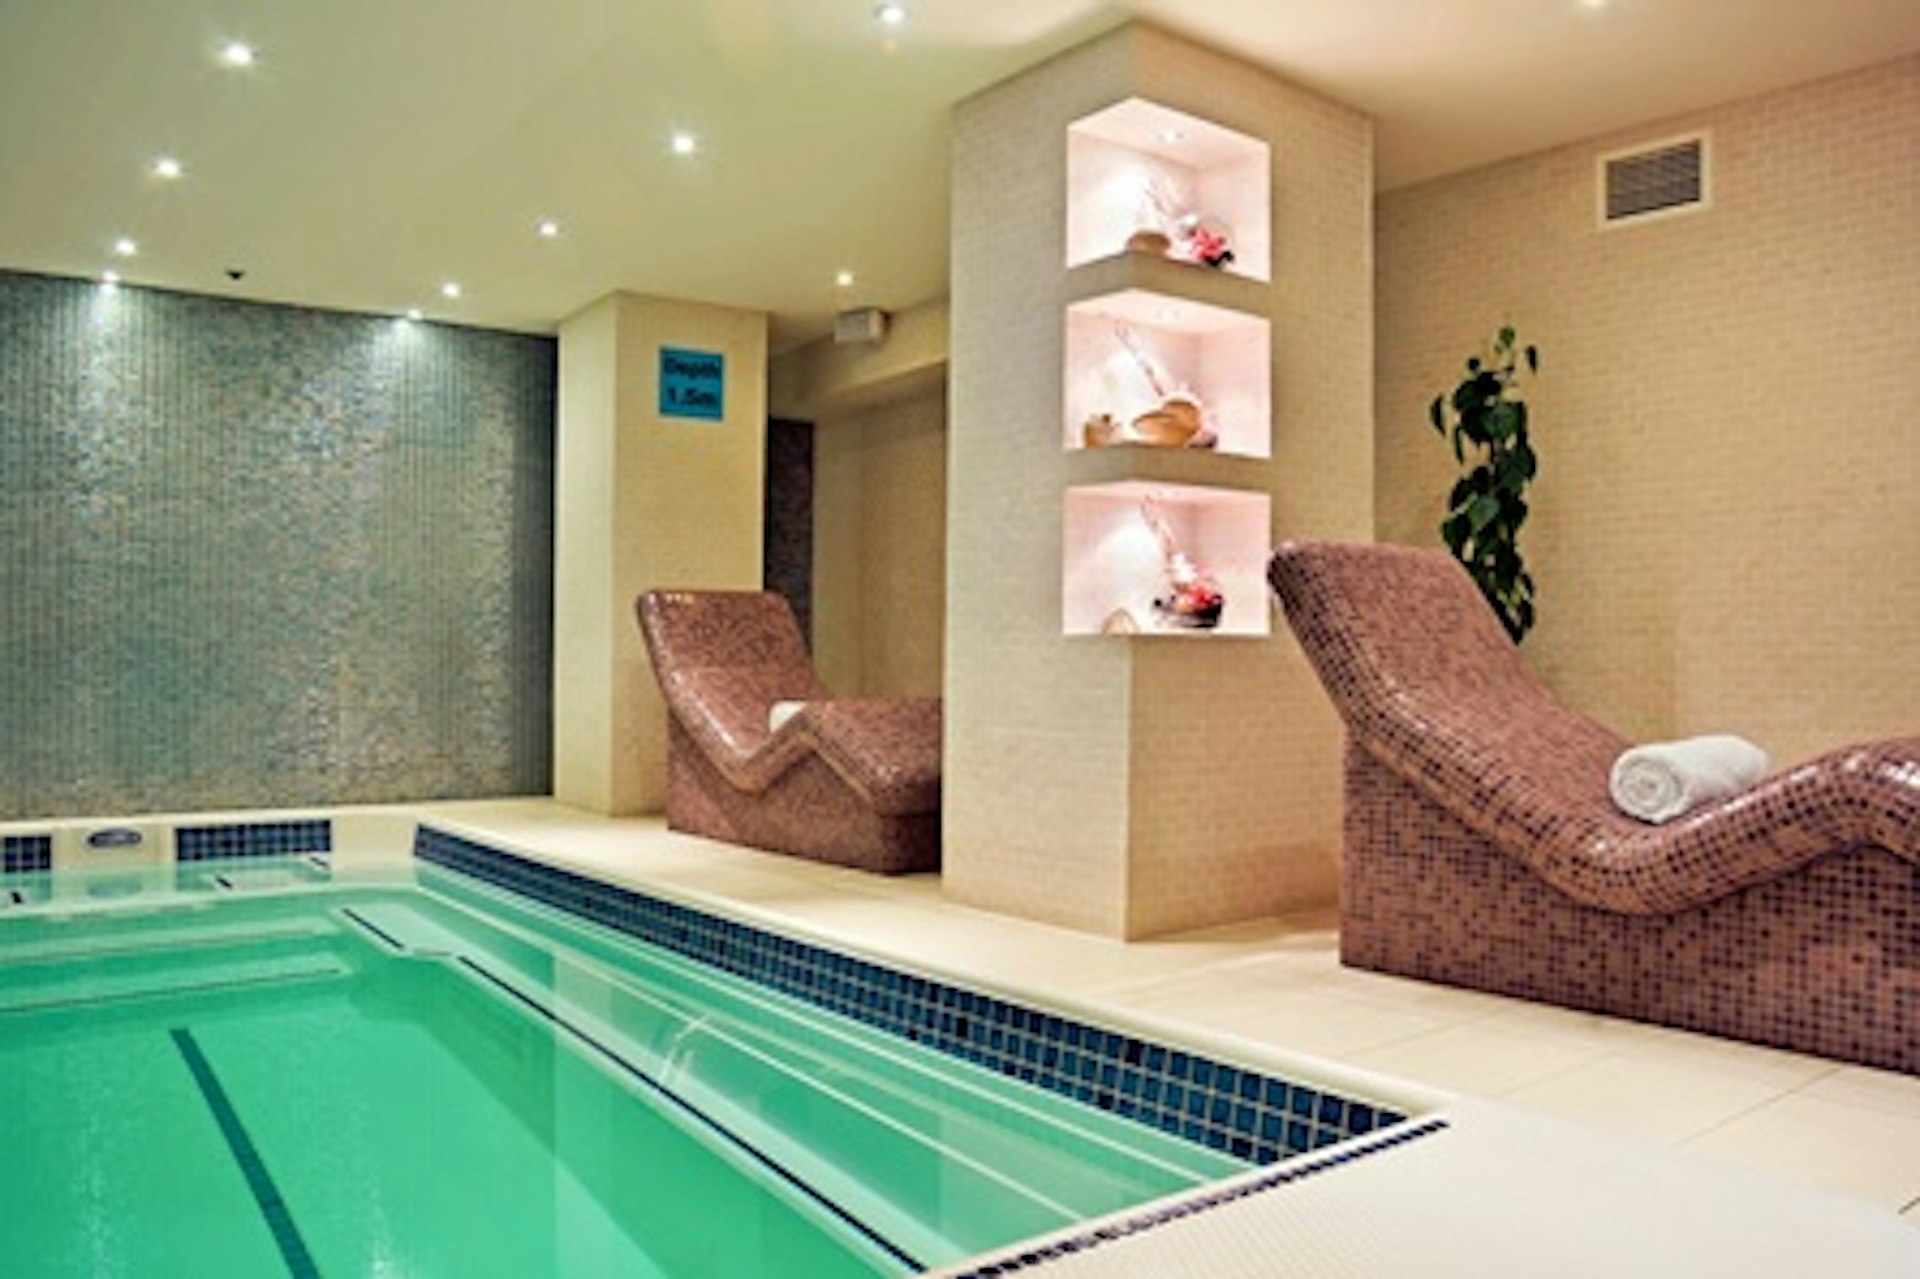 Weekday Spa Relaxation with Treatment and Prosecco for Two at the 5* Montcalm Hotel, London 3